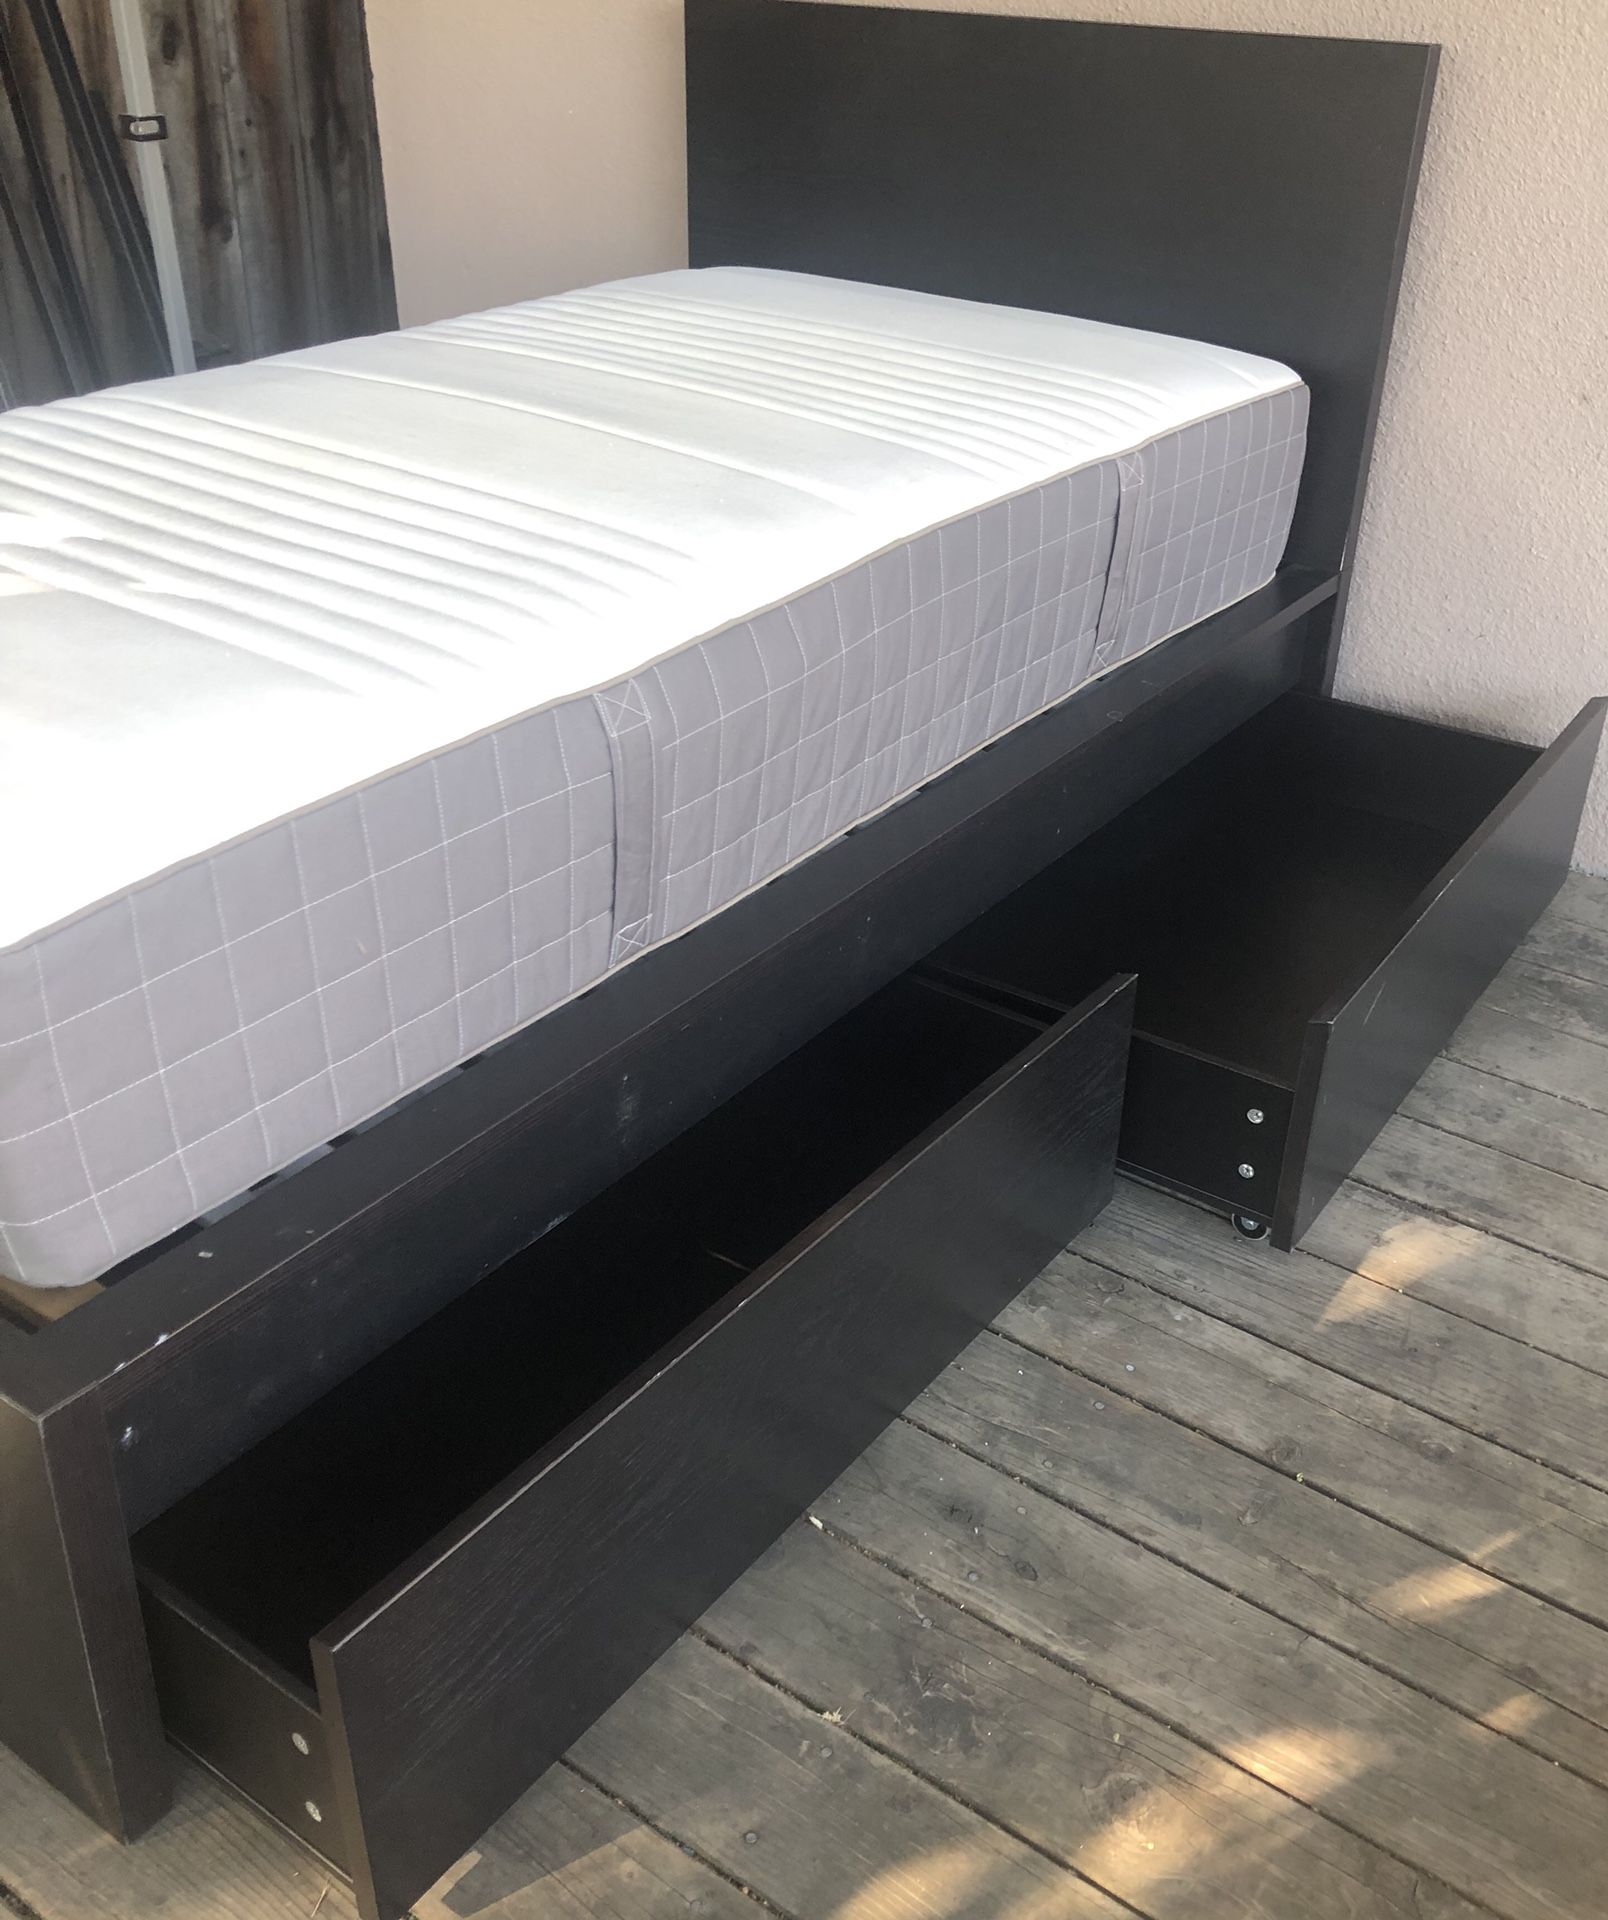 IKEA twin bed with 2 storages and mattress